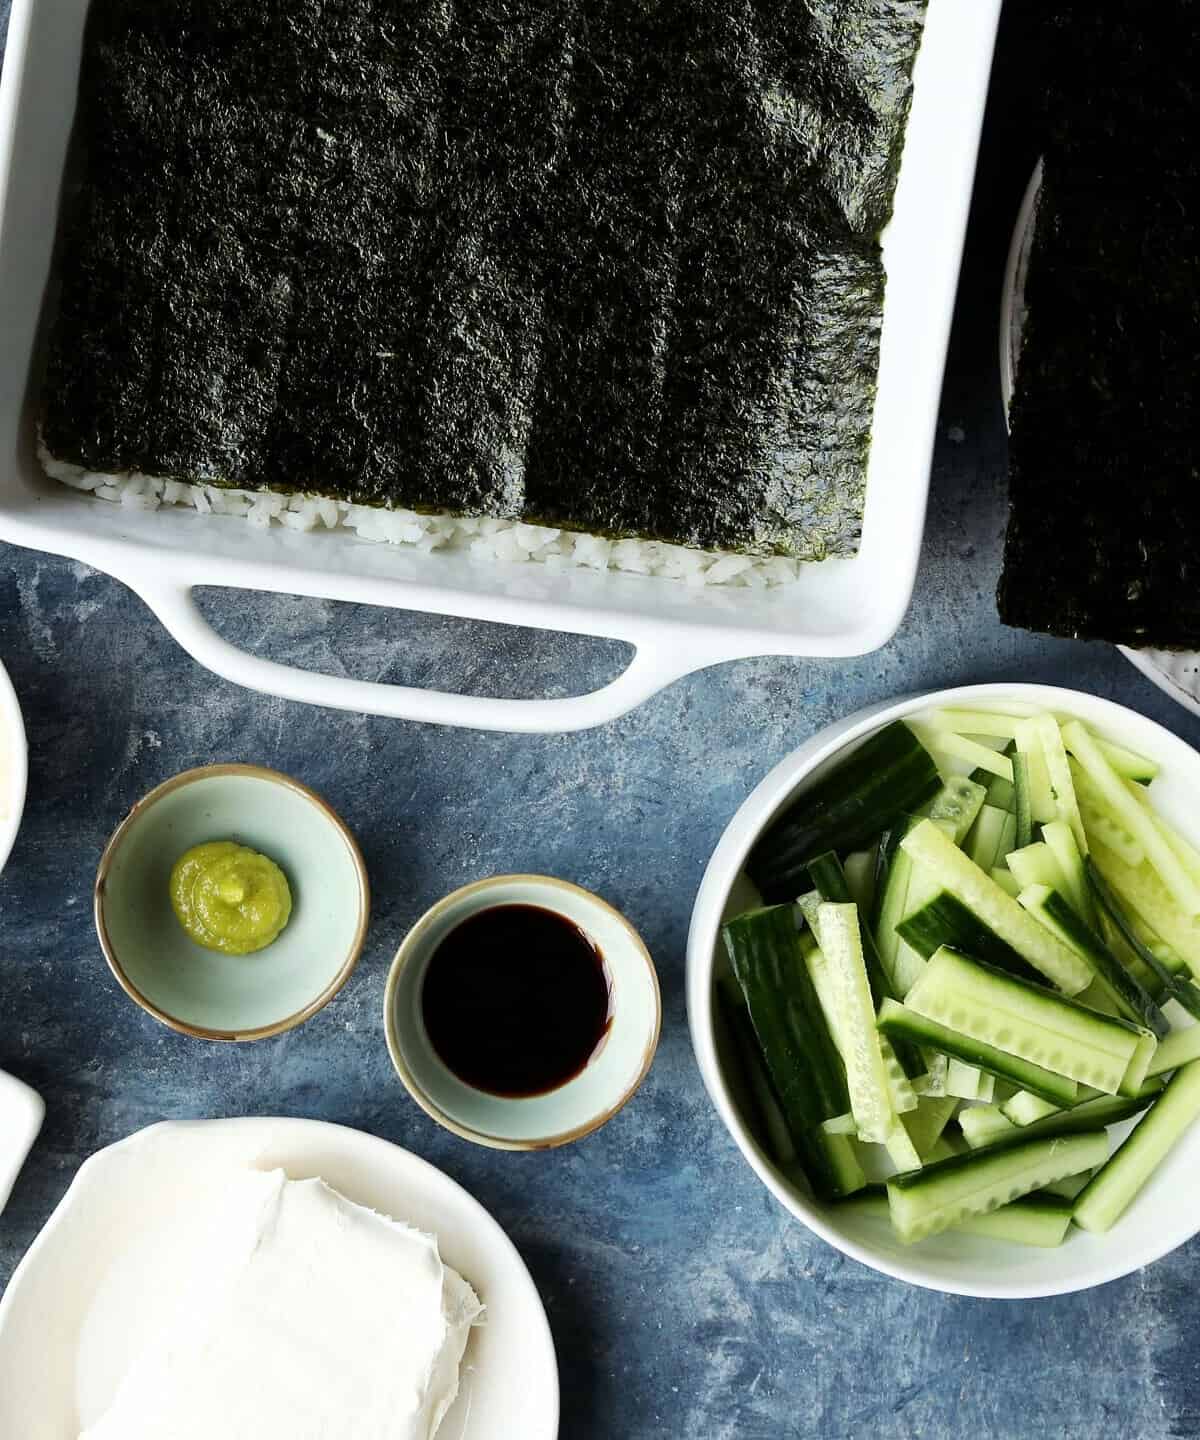  Who needs a trip to a fancy sushi restaurant when you can make this at home?